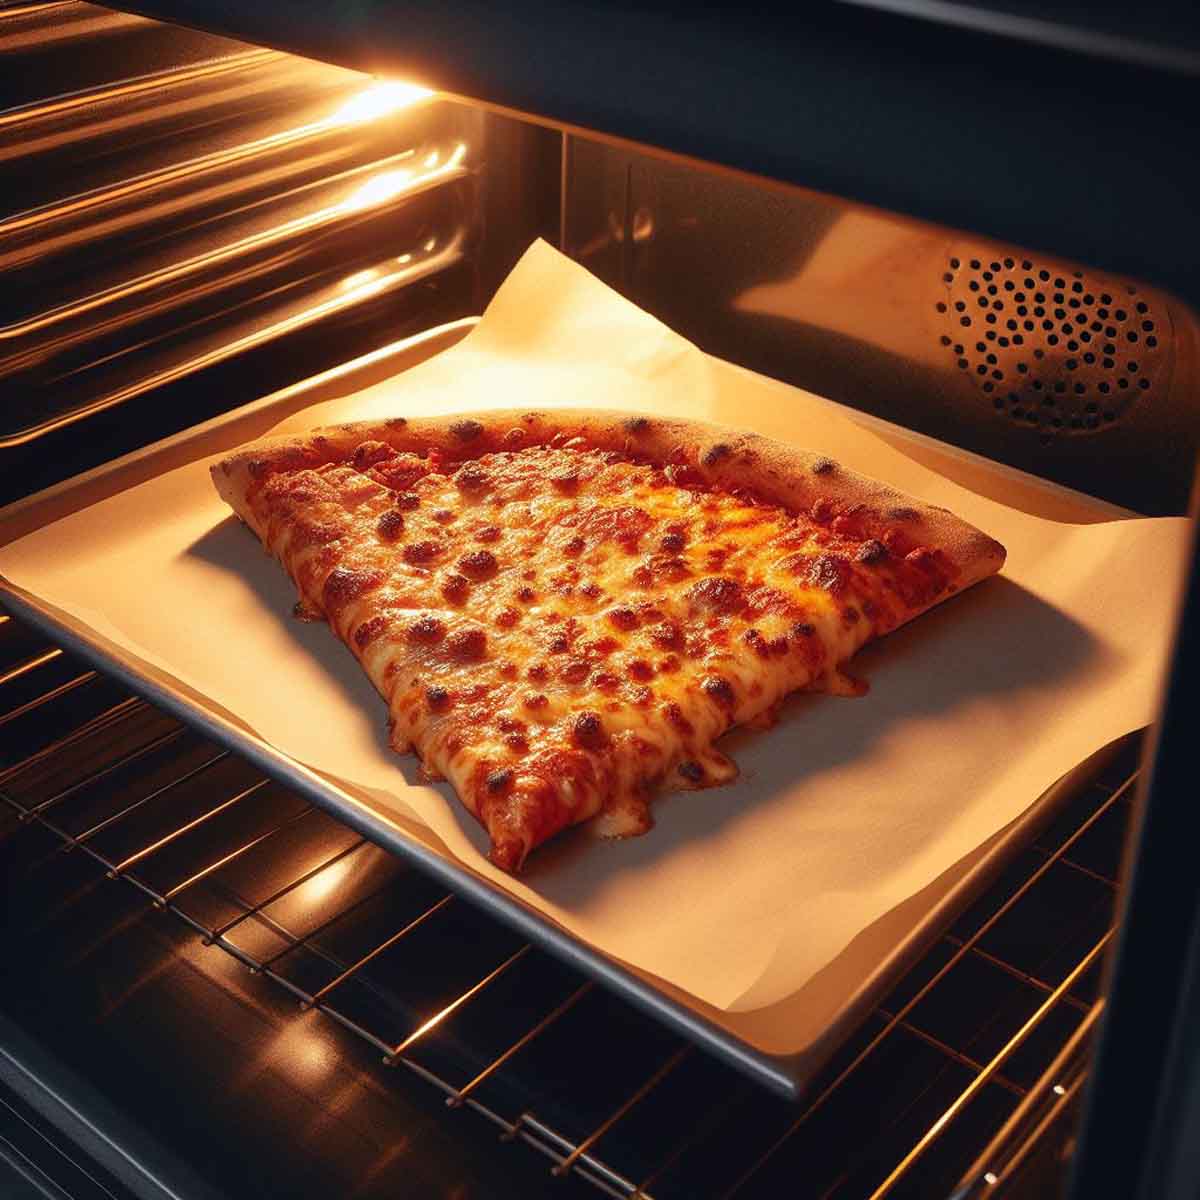 A Domino's pizza slice being reheated in an oven, with bubbling cheese and a browning crust visible through the glass door.